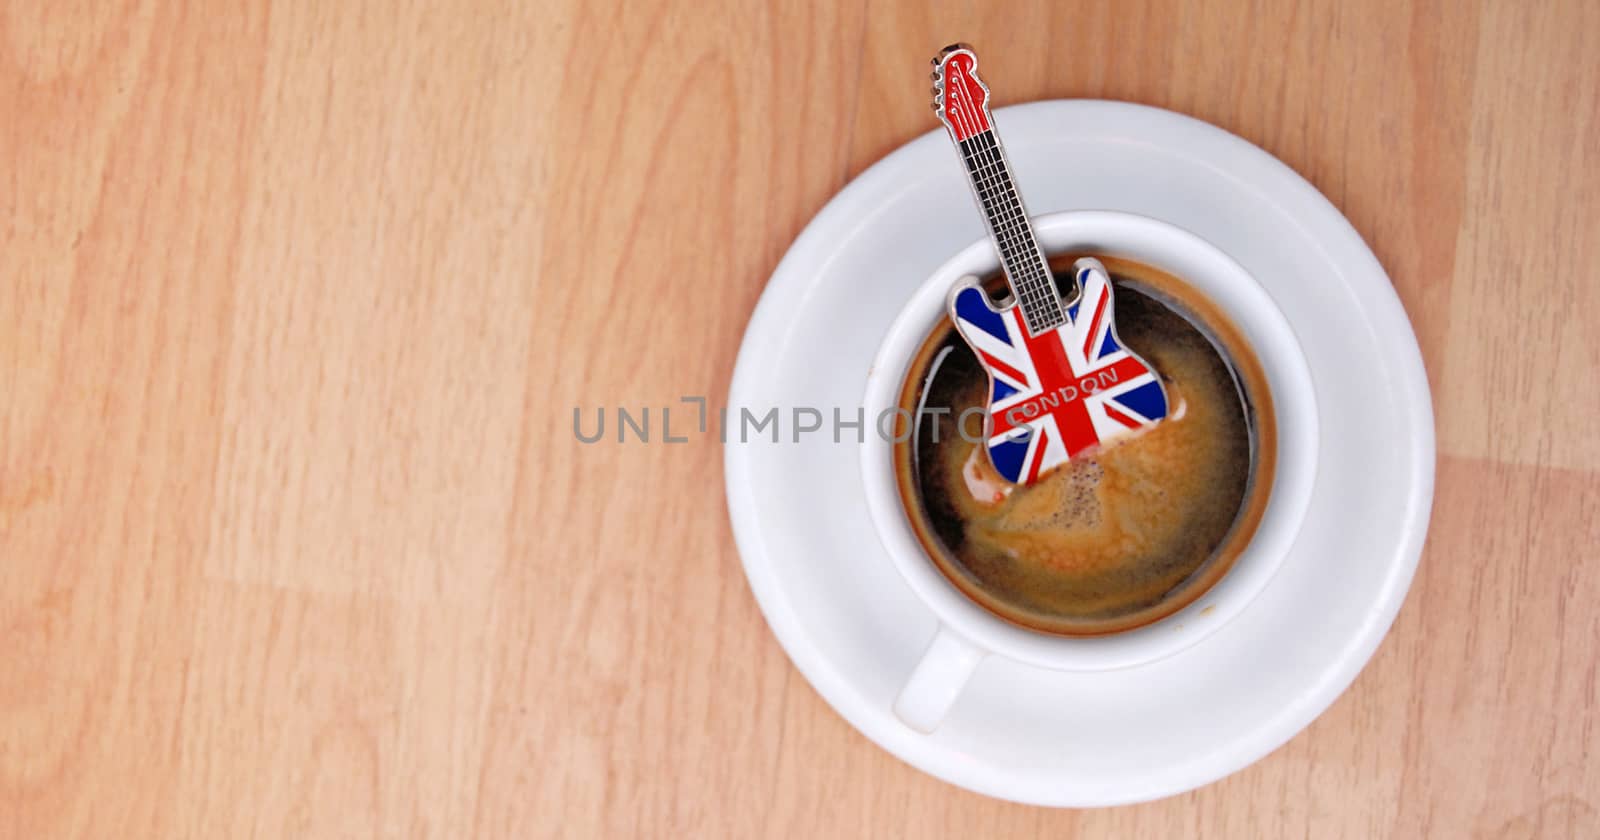 image of guitar souvenir from london in espresso cup